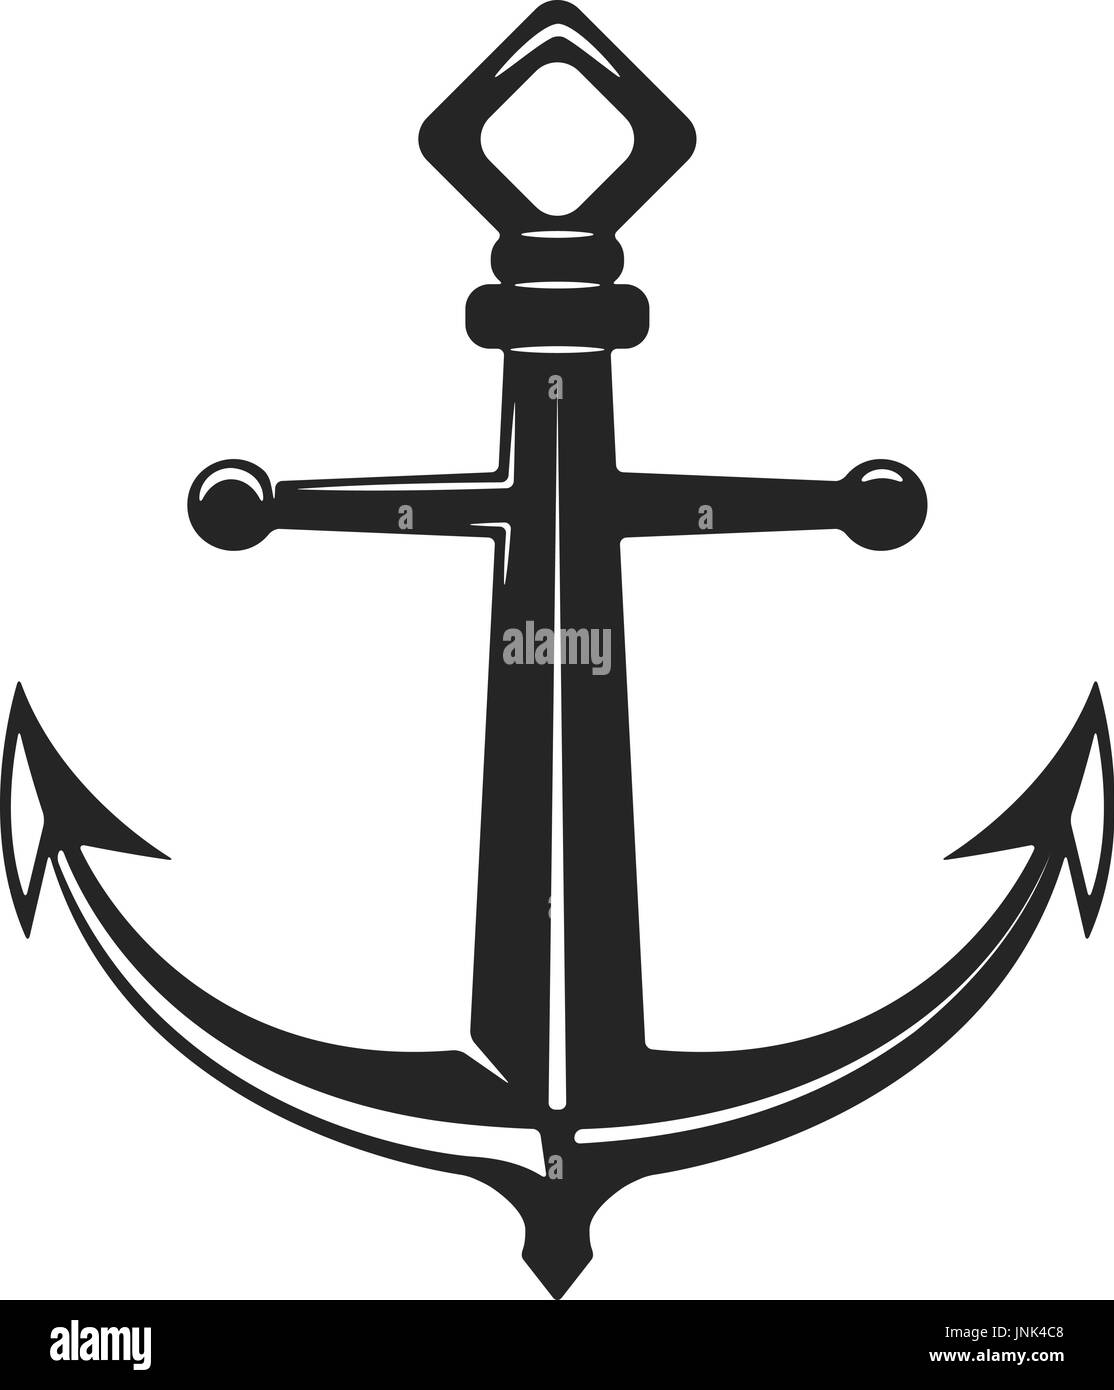 Vintage anchor illustration isolated on white background. Vector illustration Stock Vector